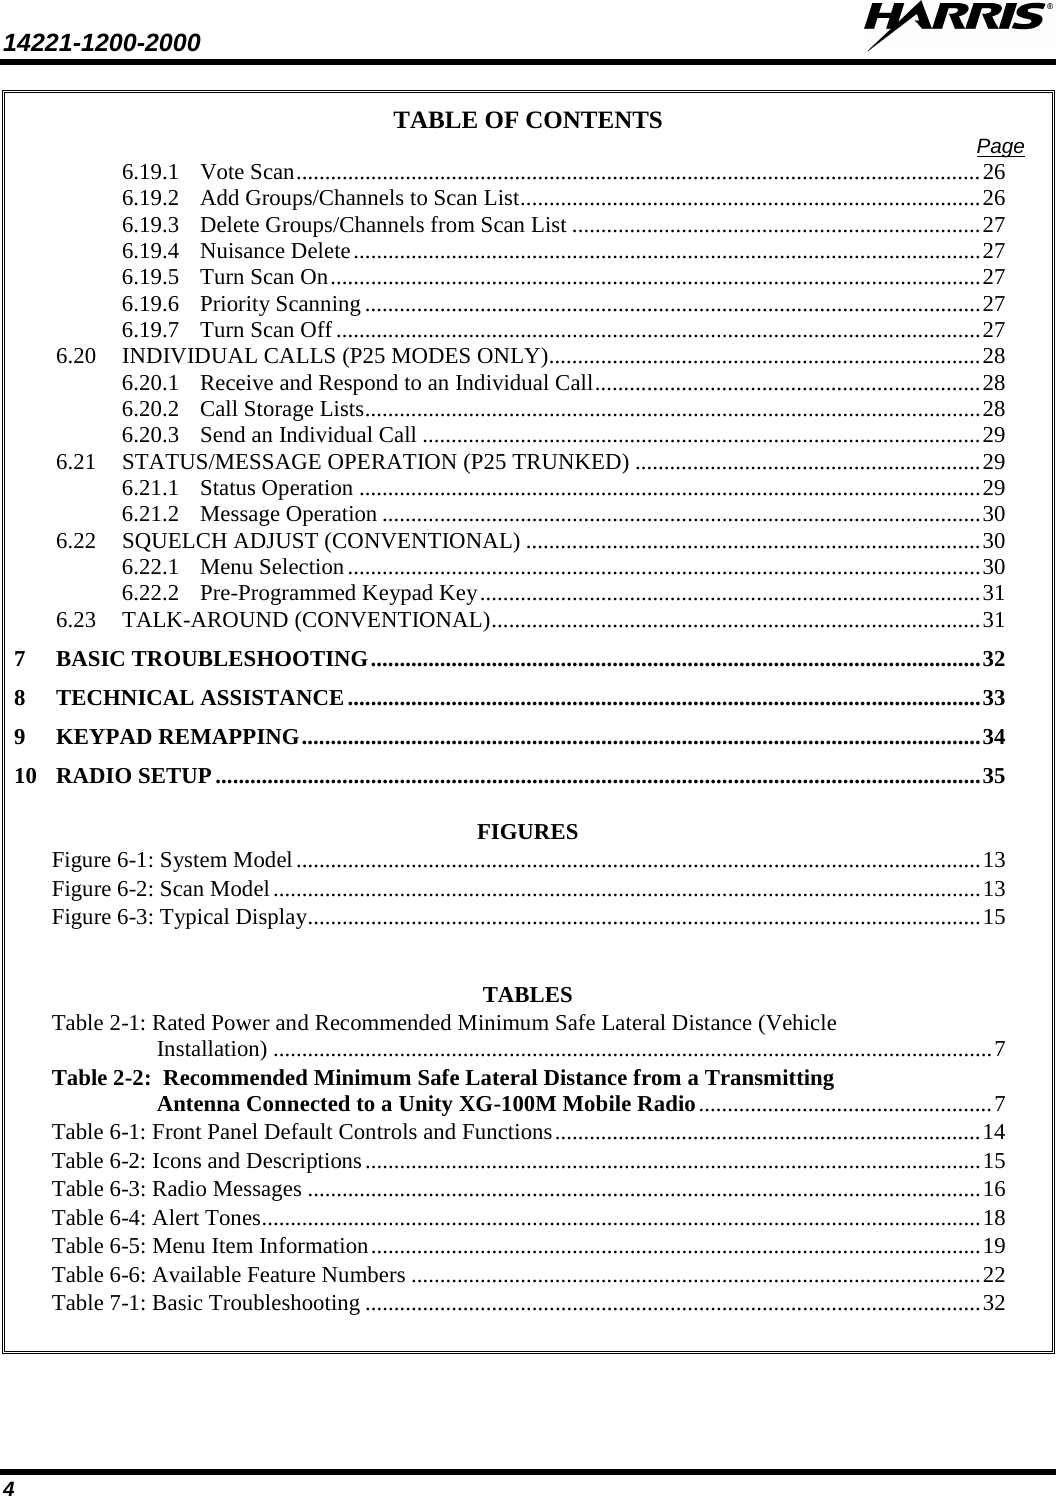 14221-1200-2000  4 TABLE OF CONTENTS Page 6.19.1 Vote Scan ....................................................................................................................... 26 6.19.2 Add Groups/Channels to Scan List ................................................................................ 26 6.19.3 Delete Groups/Channels from Scan List ....................................................................... 27 6.19.4 Nuisance Delete ............................................................................................................. 27 6.19.5 Turn Scan On ................................................................................................................. 27 6.19.6 Priority Scanning ........................................................................................................... 27 6.19.7 Turn Scan Off ................................................................................................................ 27 6.20 INDIVIDUAL CALLS (P25 MODES ONLY) ........................................................................... 28 6.20.1 Receive and Respond to an Individual Call ................................................................... 28 6.20.2 Call Storage Lists ........................................................................................................... 28 6.20.3 Send an Individual Call ................................................................................................. 29 6.21 STATUS/MESSAGE OPERATION (P25 TRUNKED) ............................................................ 29 6.21.1 Status Operation ............................................................................................................ 29 6.21.2 Message Operation ........................................................................................................ 30 6.22 SQUELCH ADJUST (CONVENTIONAL) ............................................................................... 30 6.22.1 Menu Selection .............................................................................................................. 30 6.22.2 Pre-Programmed Keypad Key ....................................................................................... 31 6.23 TALK-AROUND (CONVENTIONAL) ..................................................................................... 31 7 BASIC TROUBLESHOOTING .......................................................................................................... 32 8 TECHNICAL ASSISTANCE .............................................................................................................. 33 9 KEYPAD REMAPPING ...................................................................................................................... 34 10 RADIO SETUP ..................................................................................................................................... 35  FIGURES Figure 6-1: System Model ....................................................................................................................... 13 Figure 6-2: Scan Model ........................................................................................................................... 13 Figure 6-3: Typical Display ..................................................................................................................... 15   TABLES Table 2-1: Rated Power and Recommended Minimum Safe Lateral Distance (Vehicle Installation) ............................................................................................................................. 7 Table 2-2:  Recommended Minimum Safe Lateral Distance from a Transmitting Antenna Connected to a Unity XG-100M Mobile Radio ................................................... 7 Table 6-1: Front Panel Default Controls and Functions .......................................................................... 14 Table 6-2: Icons and Descriptions ........................................................................................................... 15 Table 6-3: Radio Messages ..................................................................................................................... 16 Table 6-4: Alert Tones ............................................................................................................................. 18 Table 6-5: Menu Item Information .......................................................................................................... 19 Table 6-6: Available Feature Numbers ................................................................................................... 22 Table 7-1: Basic Troubleshooting ........................................................................................................... 32  